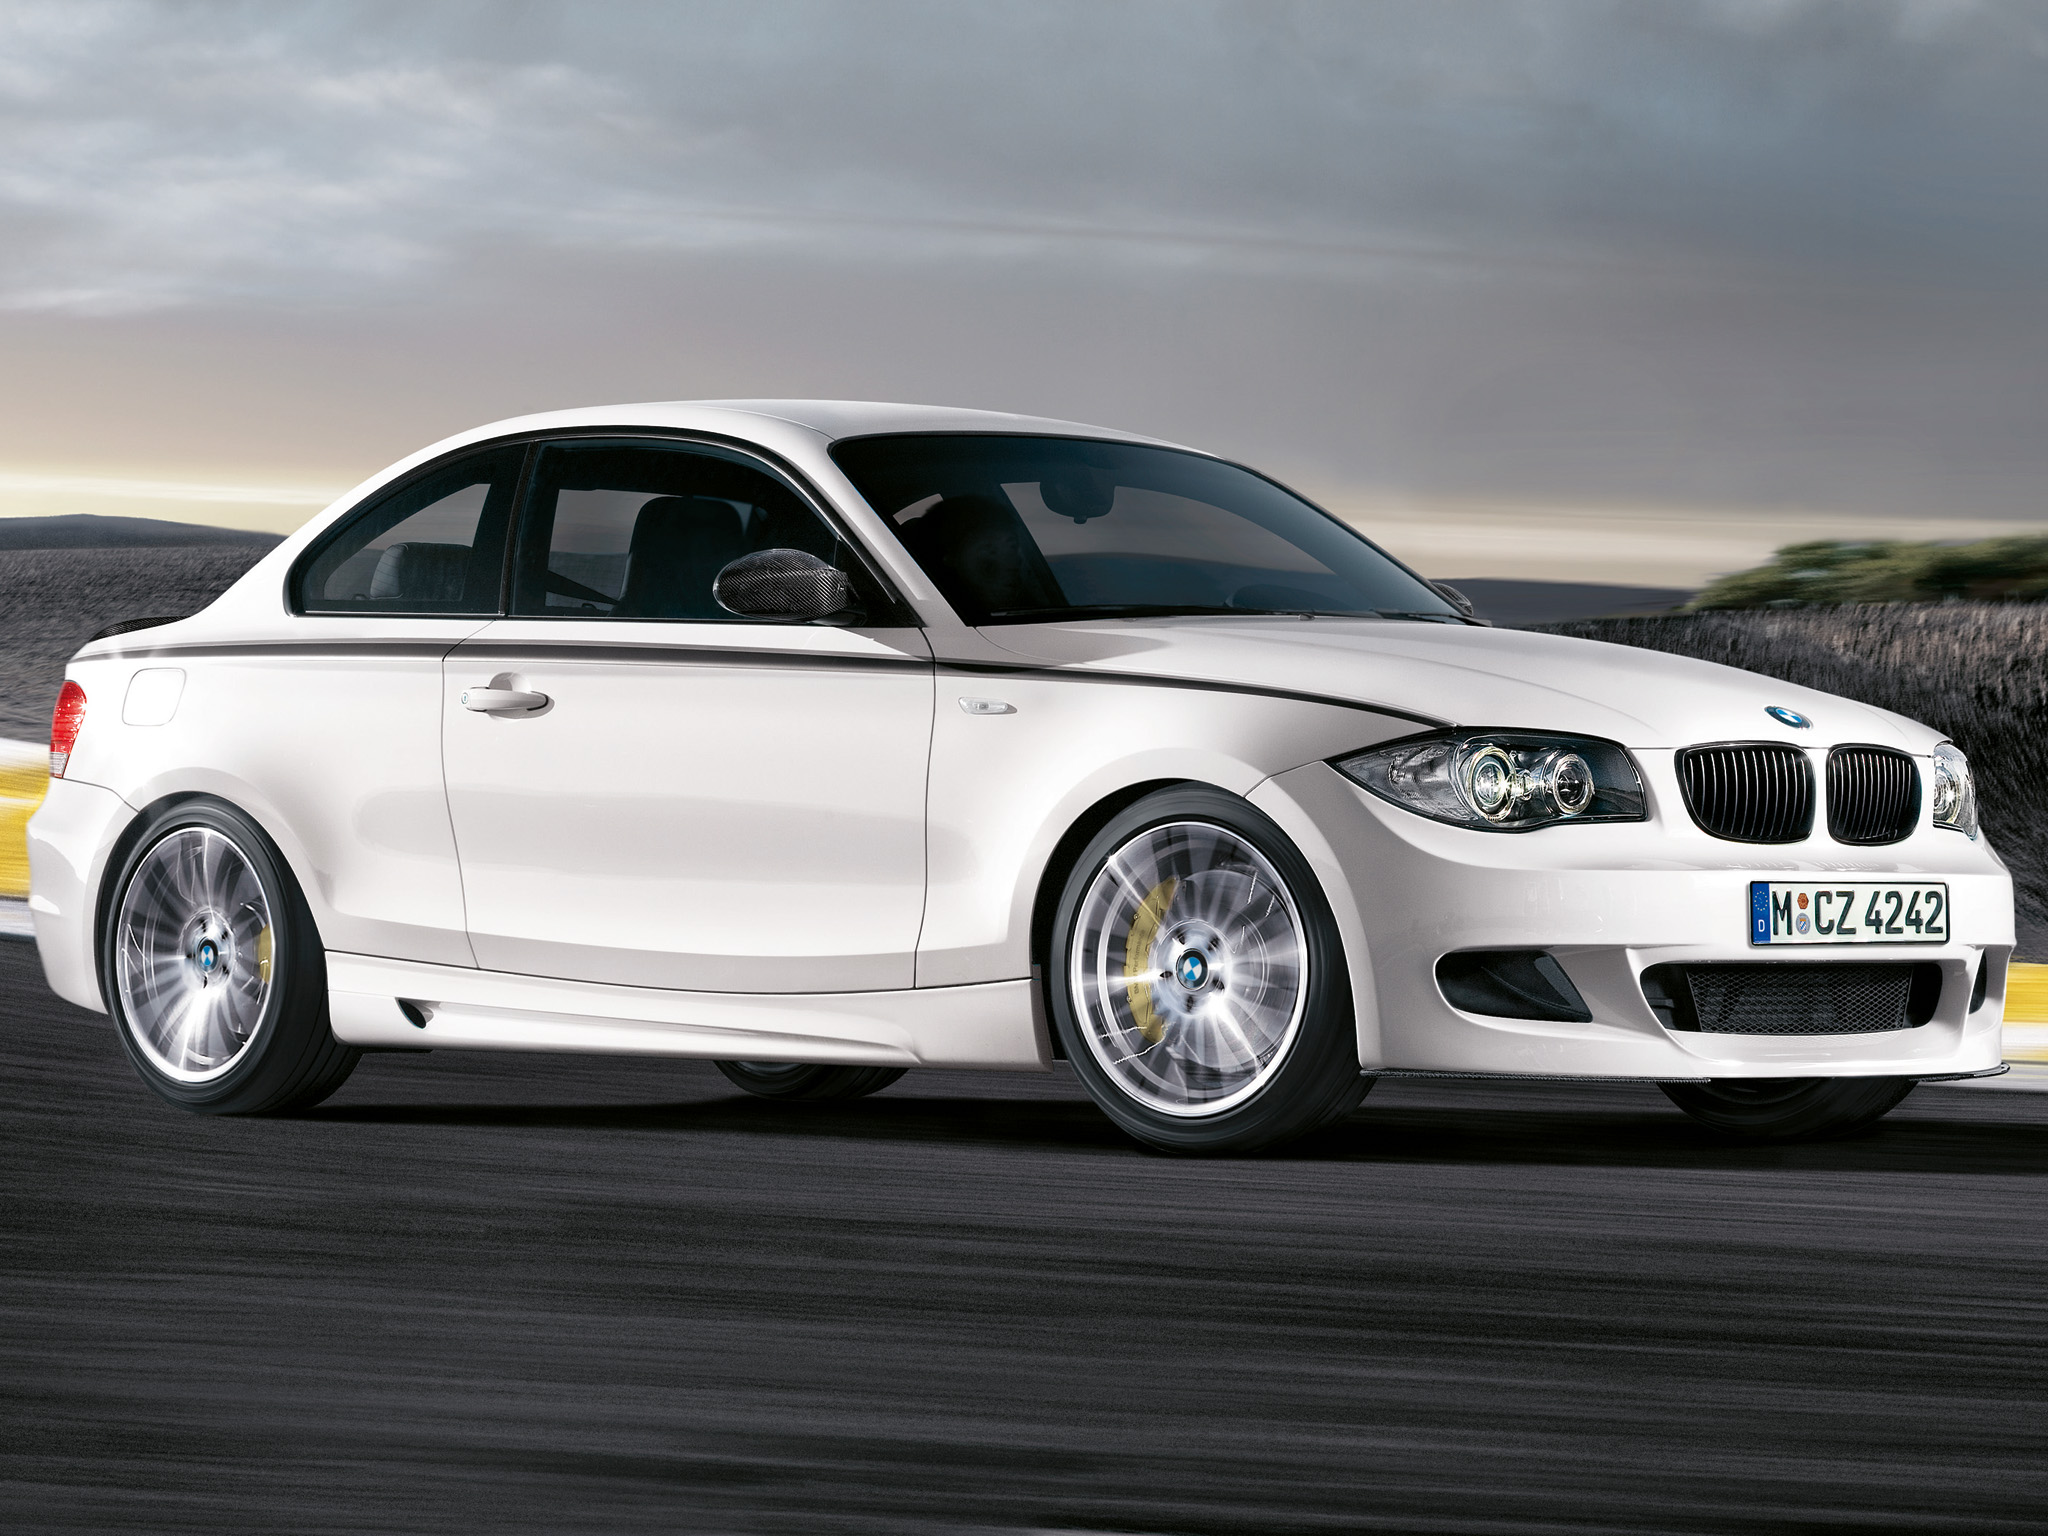 Bmw 135i Coupe Performance Power Kit E82 Wallpapers Car Wallpapers